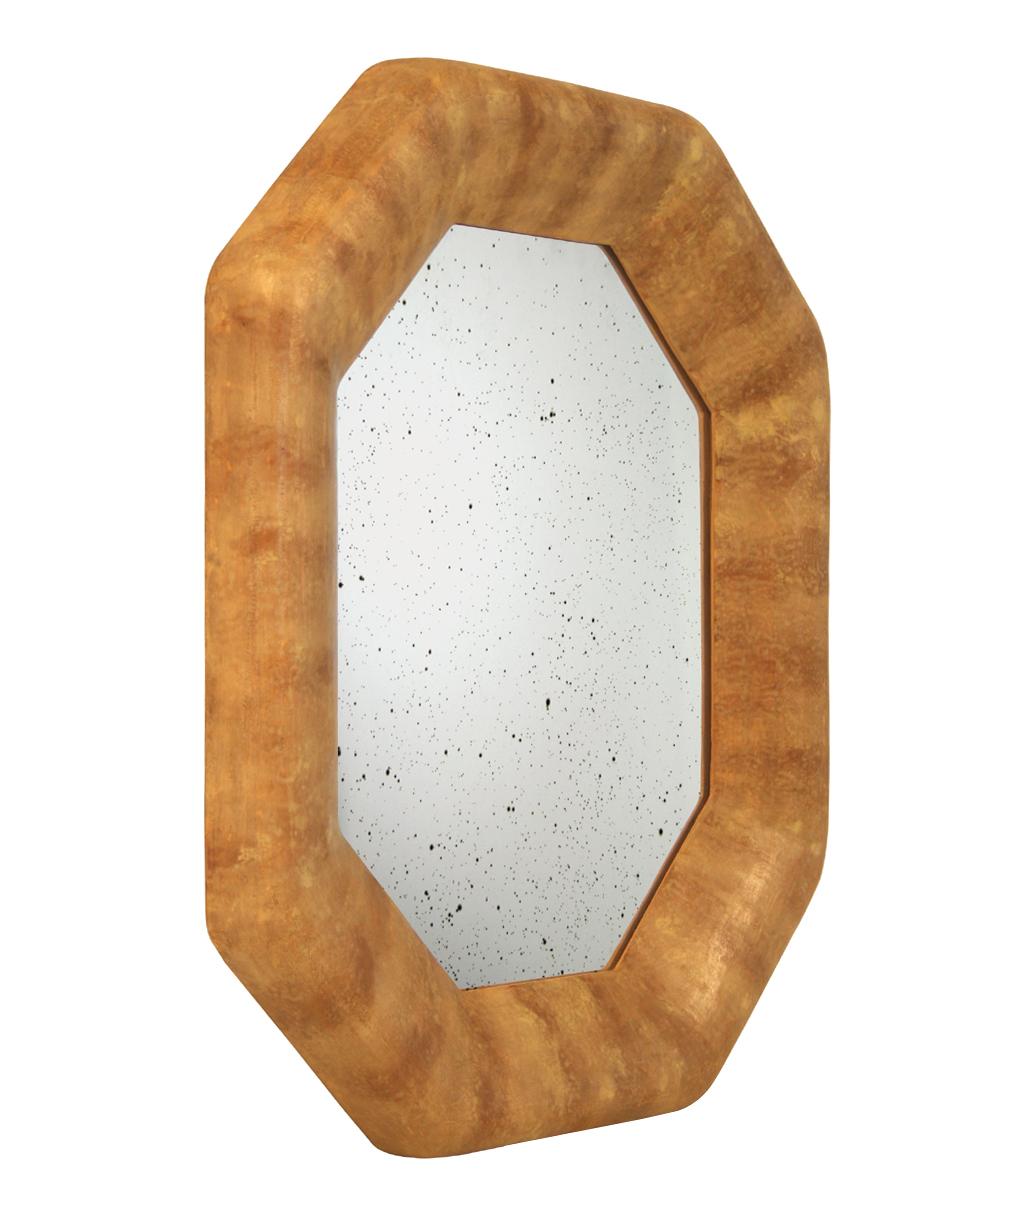 Contemporary artistic mirror. Octogonal shape sculptural composition, hand carved. Original creation of materials and colors. Limited edition, number 4 out of 8. In the back, signed by Pascal & Annie Leniau, year 2002, model 004.